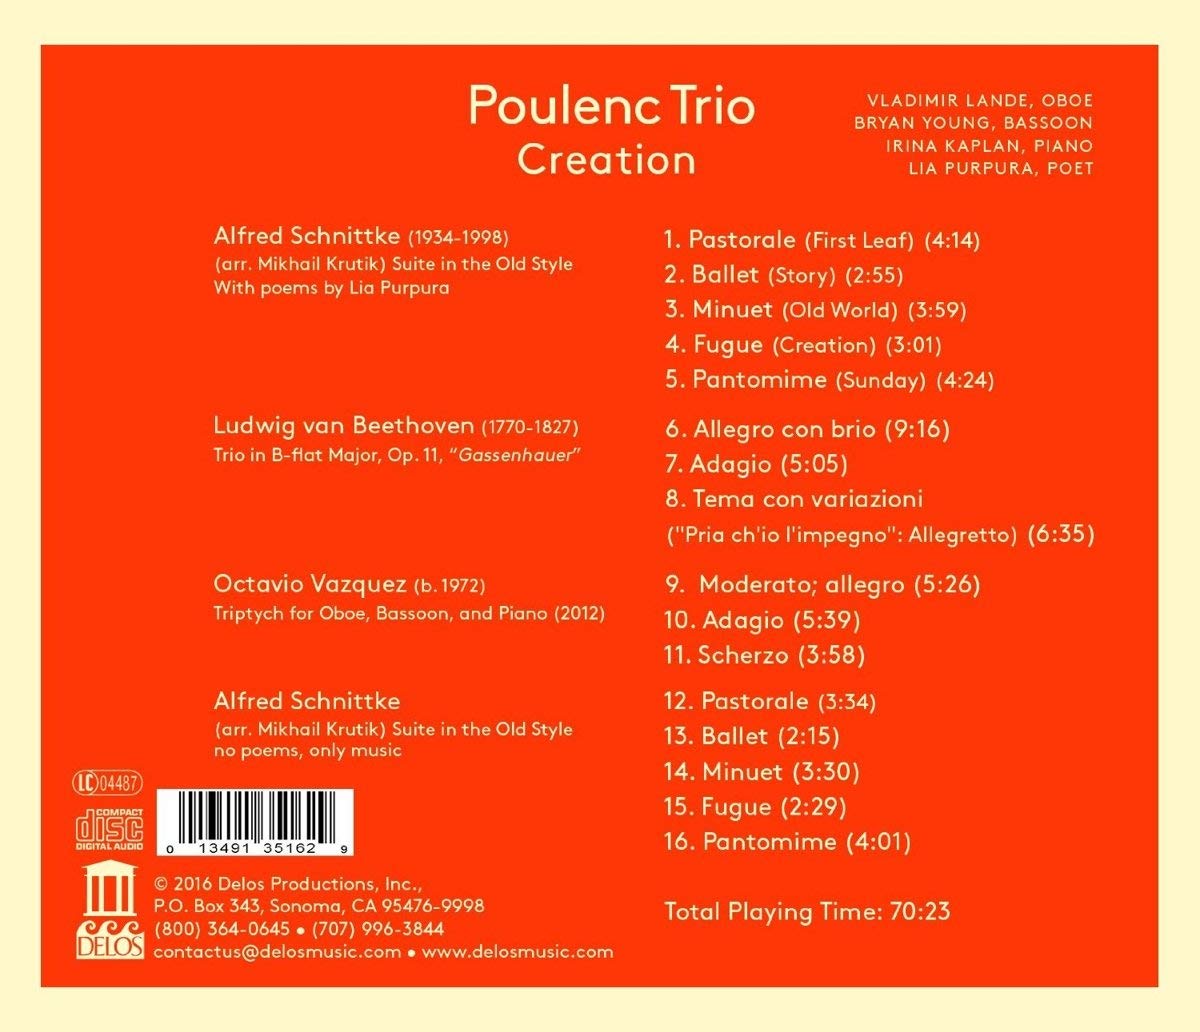 Creation - Schnittke: Suite in the Old Style; Beethoven: Trio “Gassenhauer”; Vazquez: Triptych - slide-1